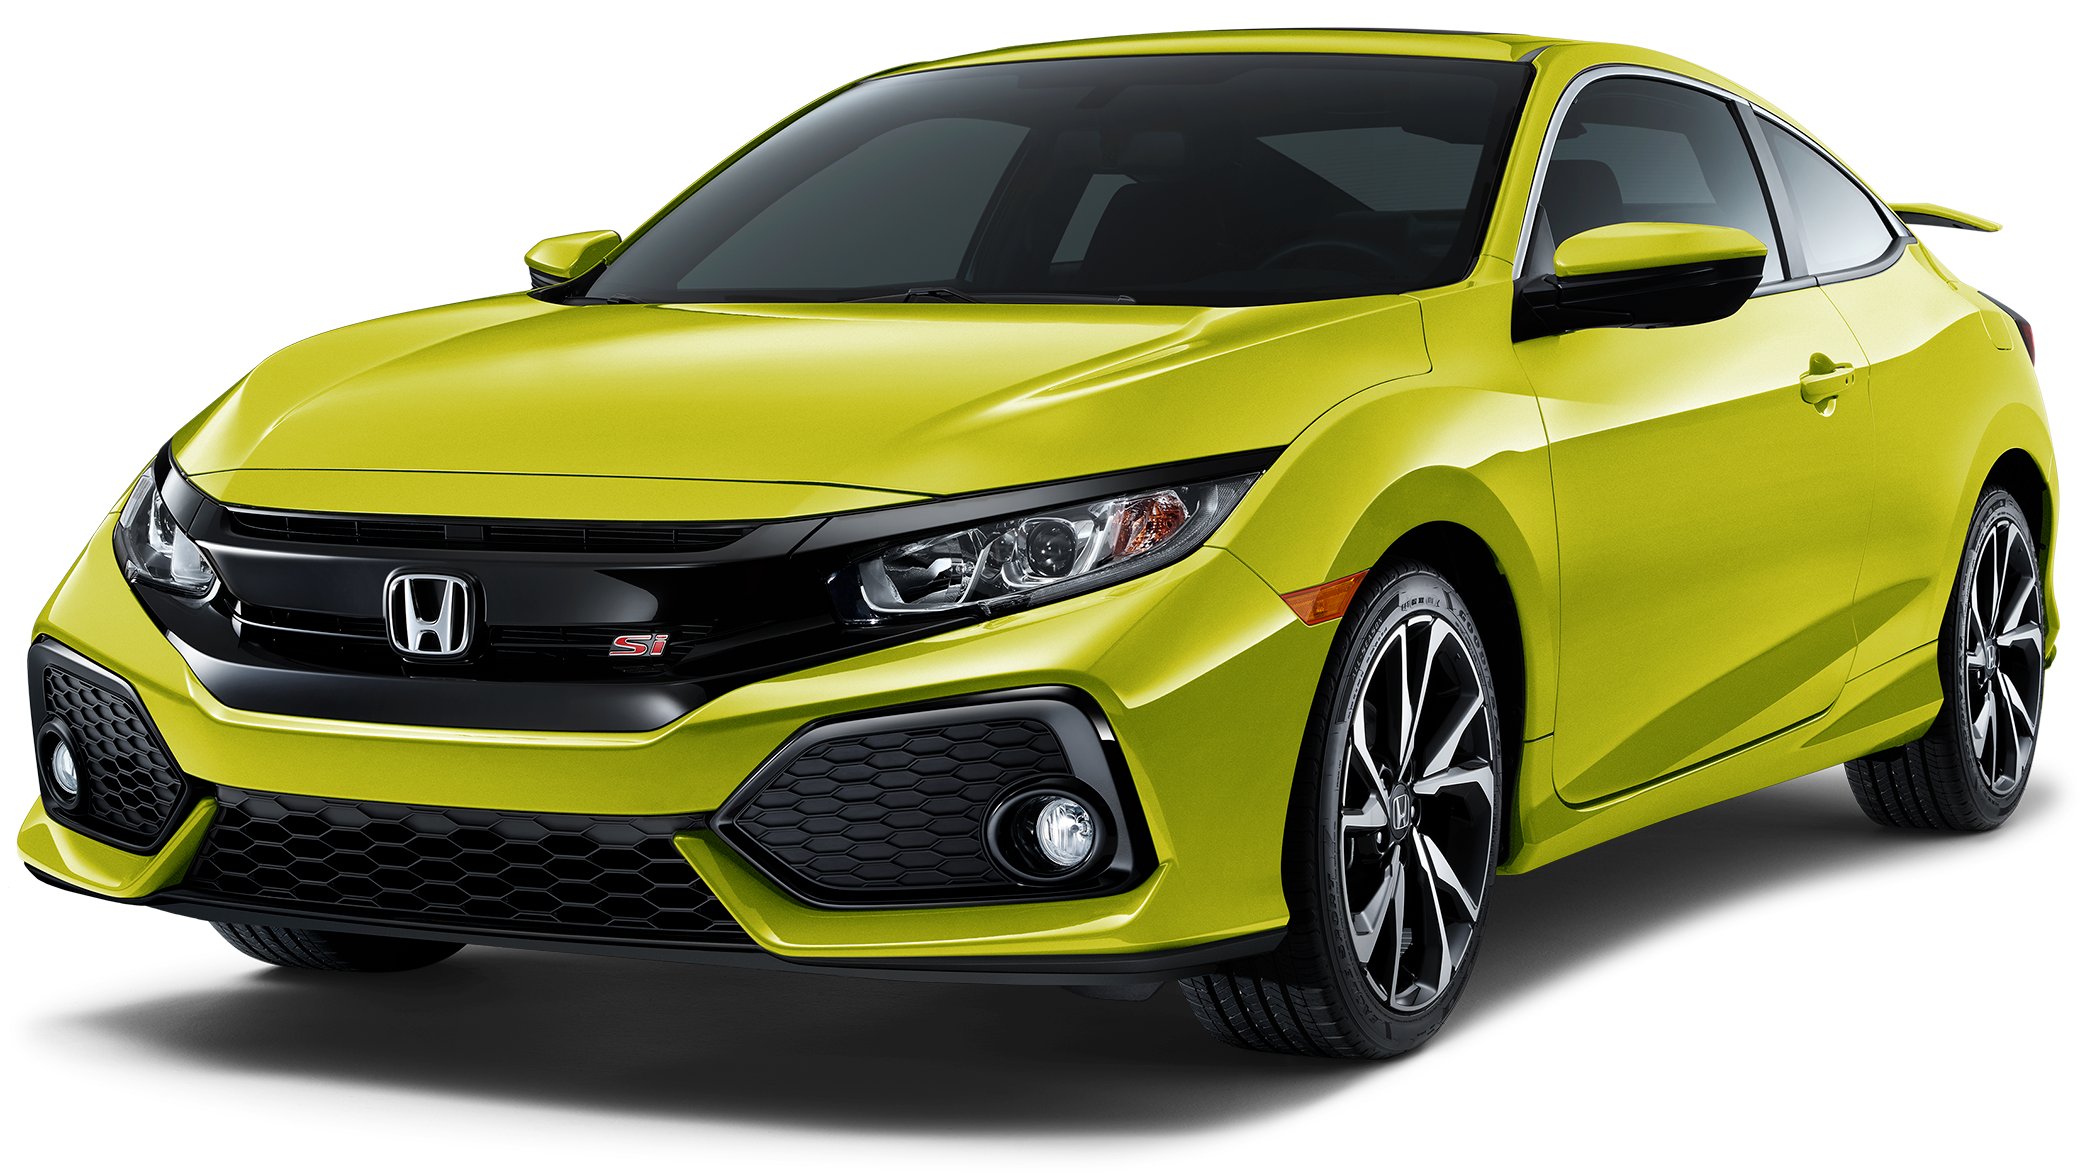 2019 Honda Civic Si Incentives, Specials & Offers in ...